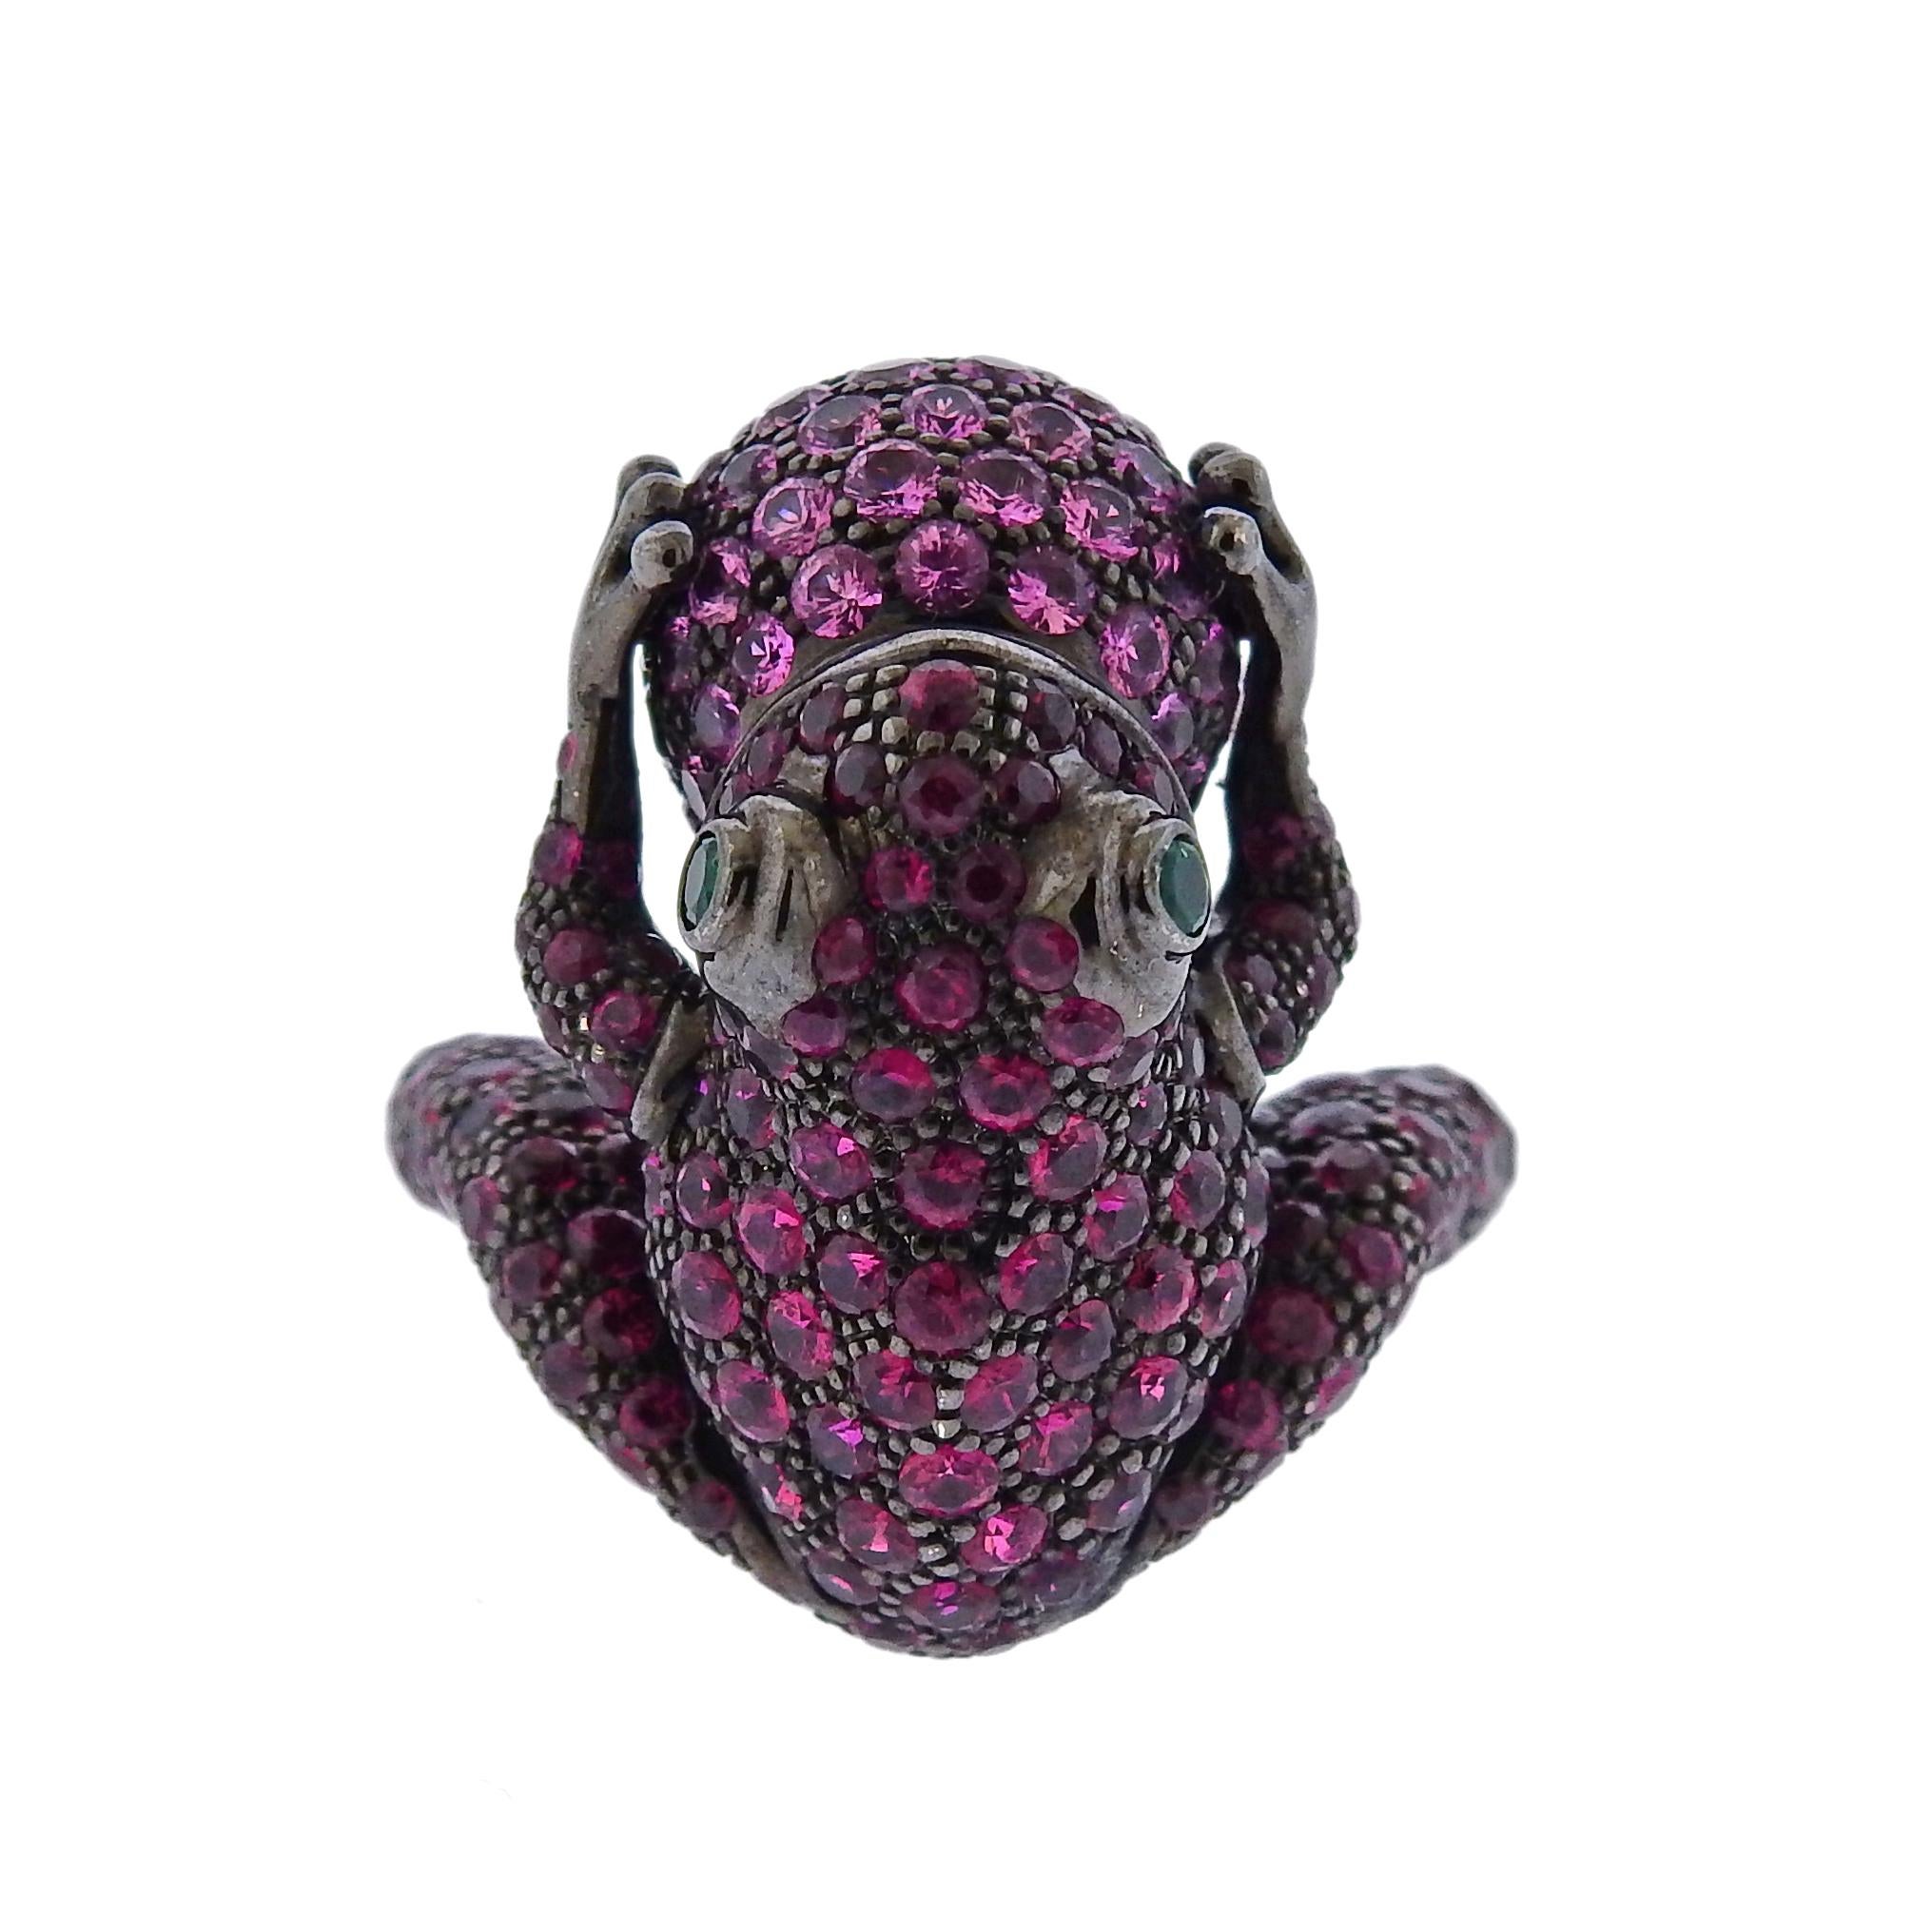 Exquisite 18k blackened white gold frog ring by Boucheron, adorned with rubies, pink sapphires and emerald eyes. Ring size - 6.5, ring top measures - 25mm x 17mm. Weight is 19.7 grams. Marked: 750,53, 544488, Boucheron, French mark. 